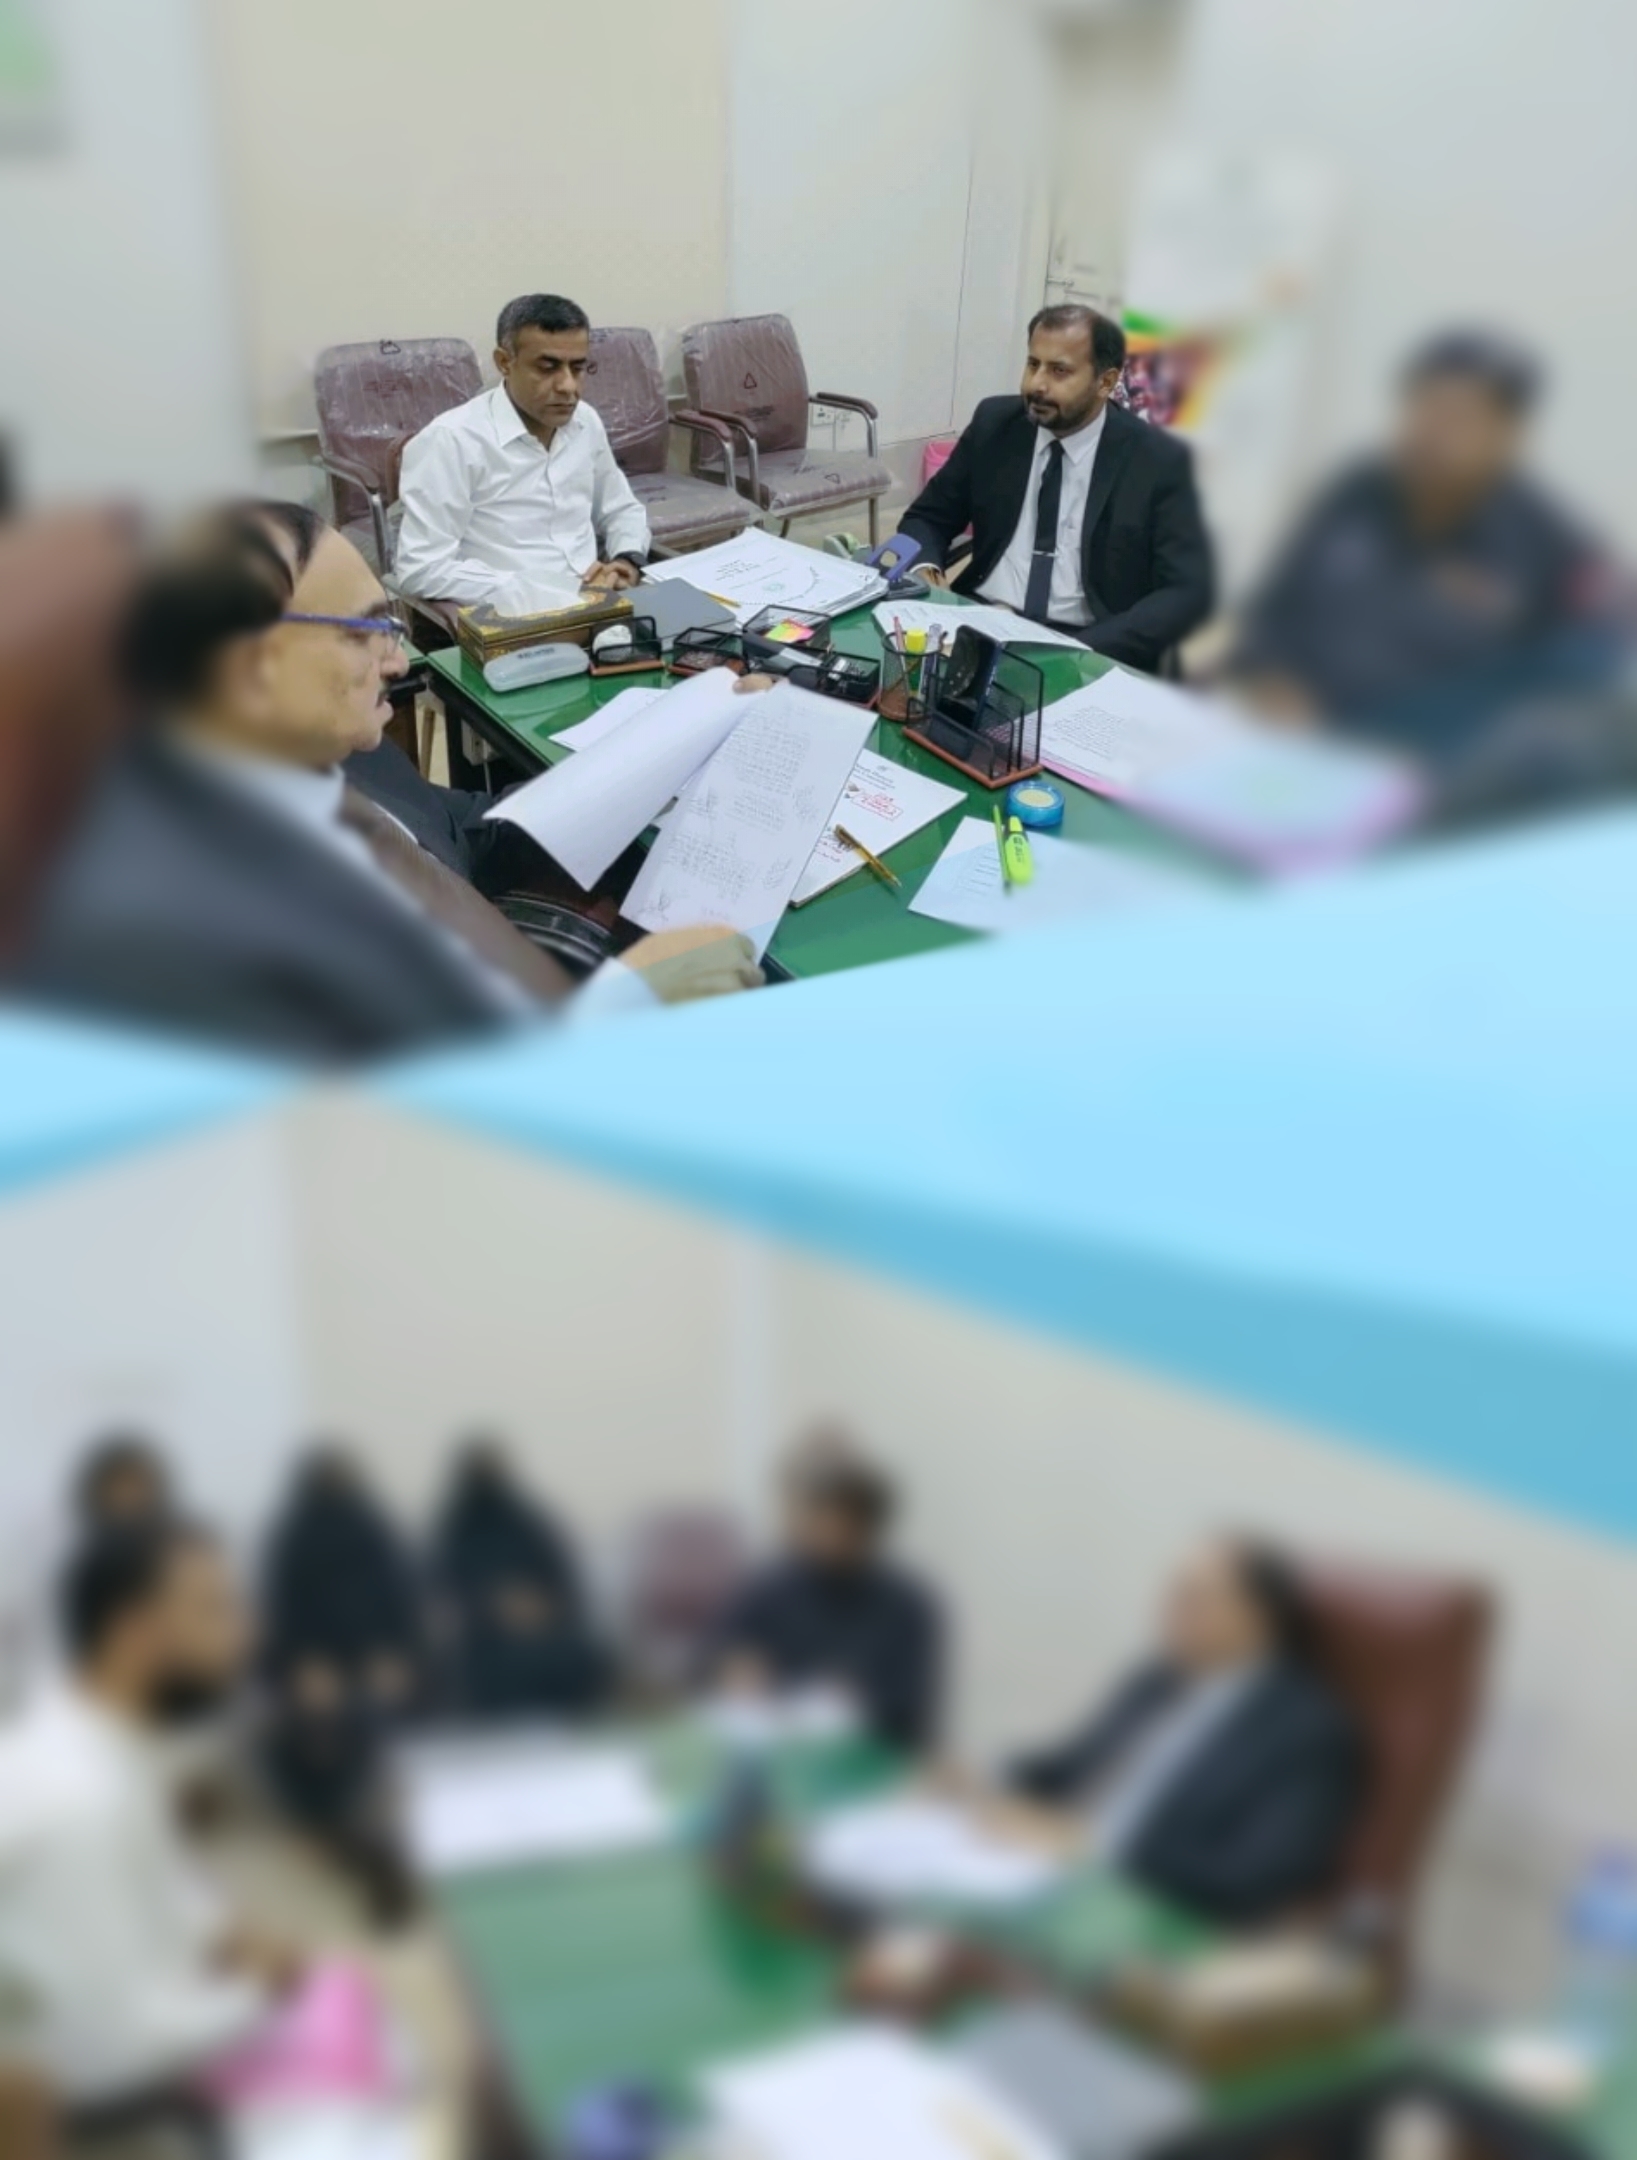 Mr. Muhammad Aslam Shaikh, Member Judicial-II (SHRC) along with his team, conducted various significant inquiries at the Sukkur Regional office of the SHRC